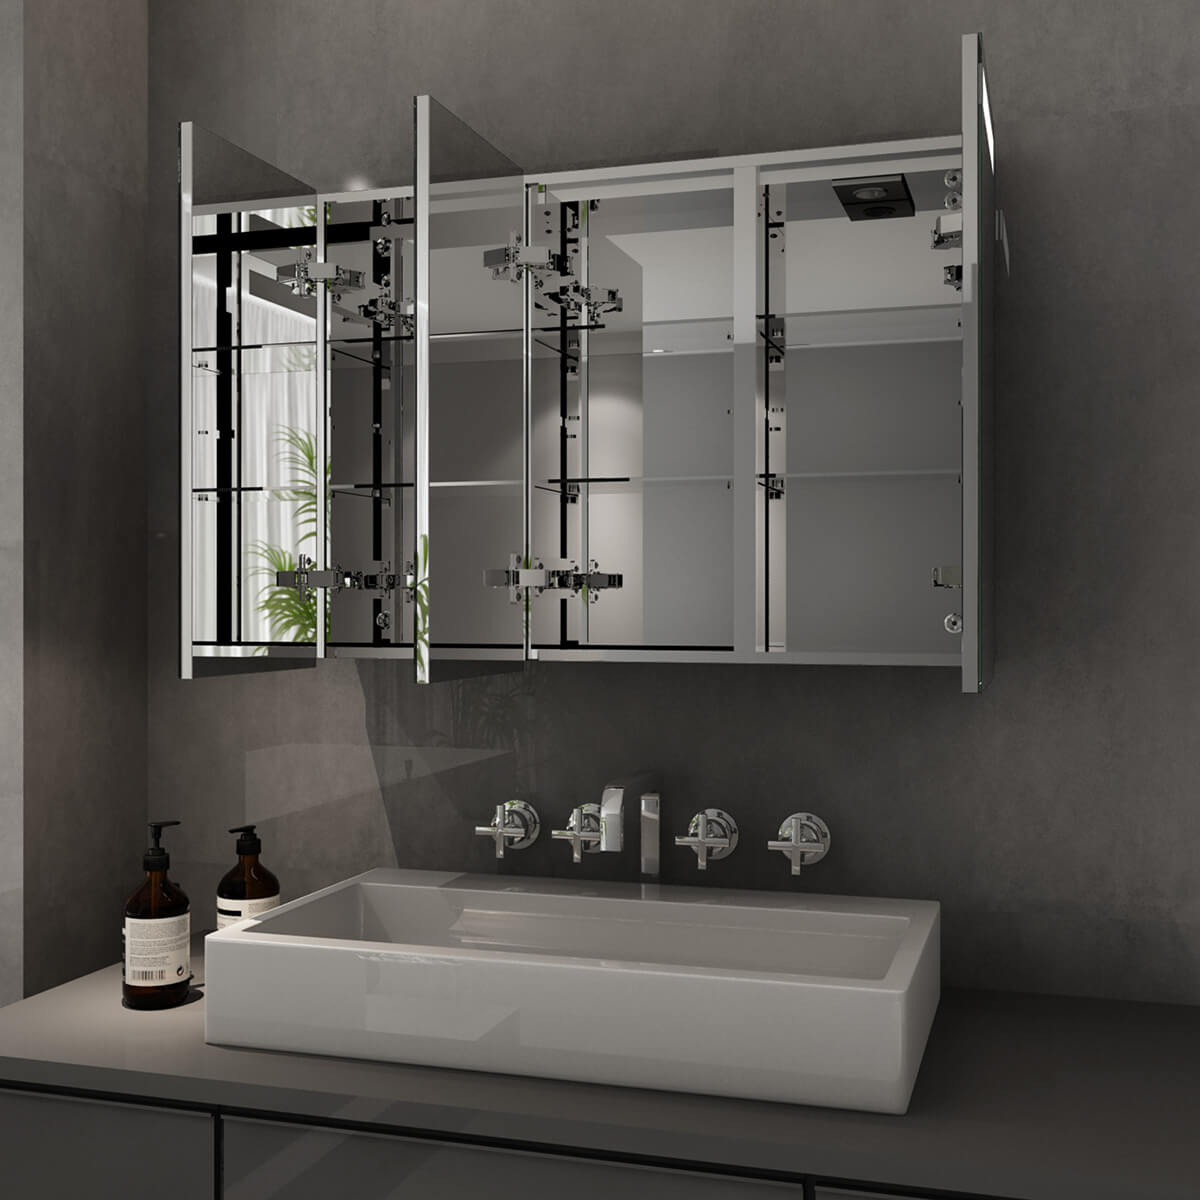 SONNI Bathroom Mirror Cabinet with Lighting, 3-Door Stainless Steel LED Mirror Cabinet 90 x 65 x 13 cm